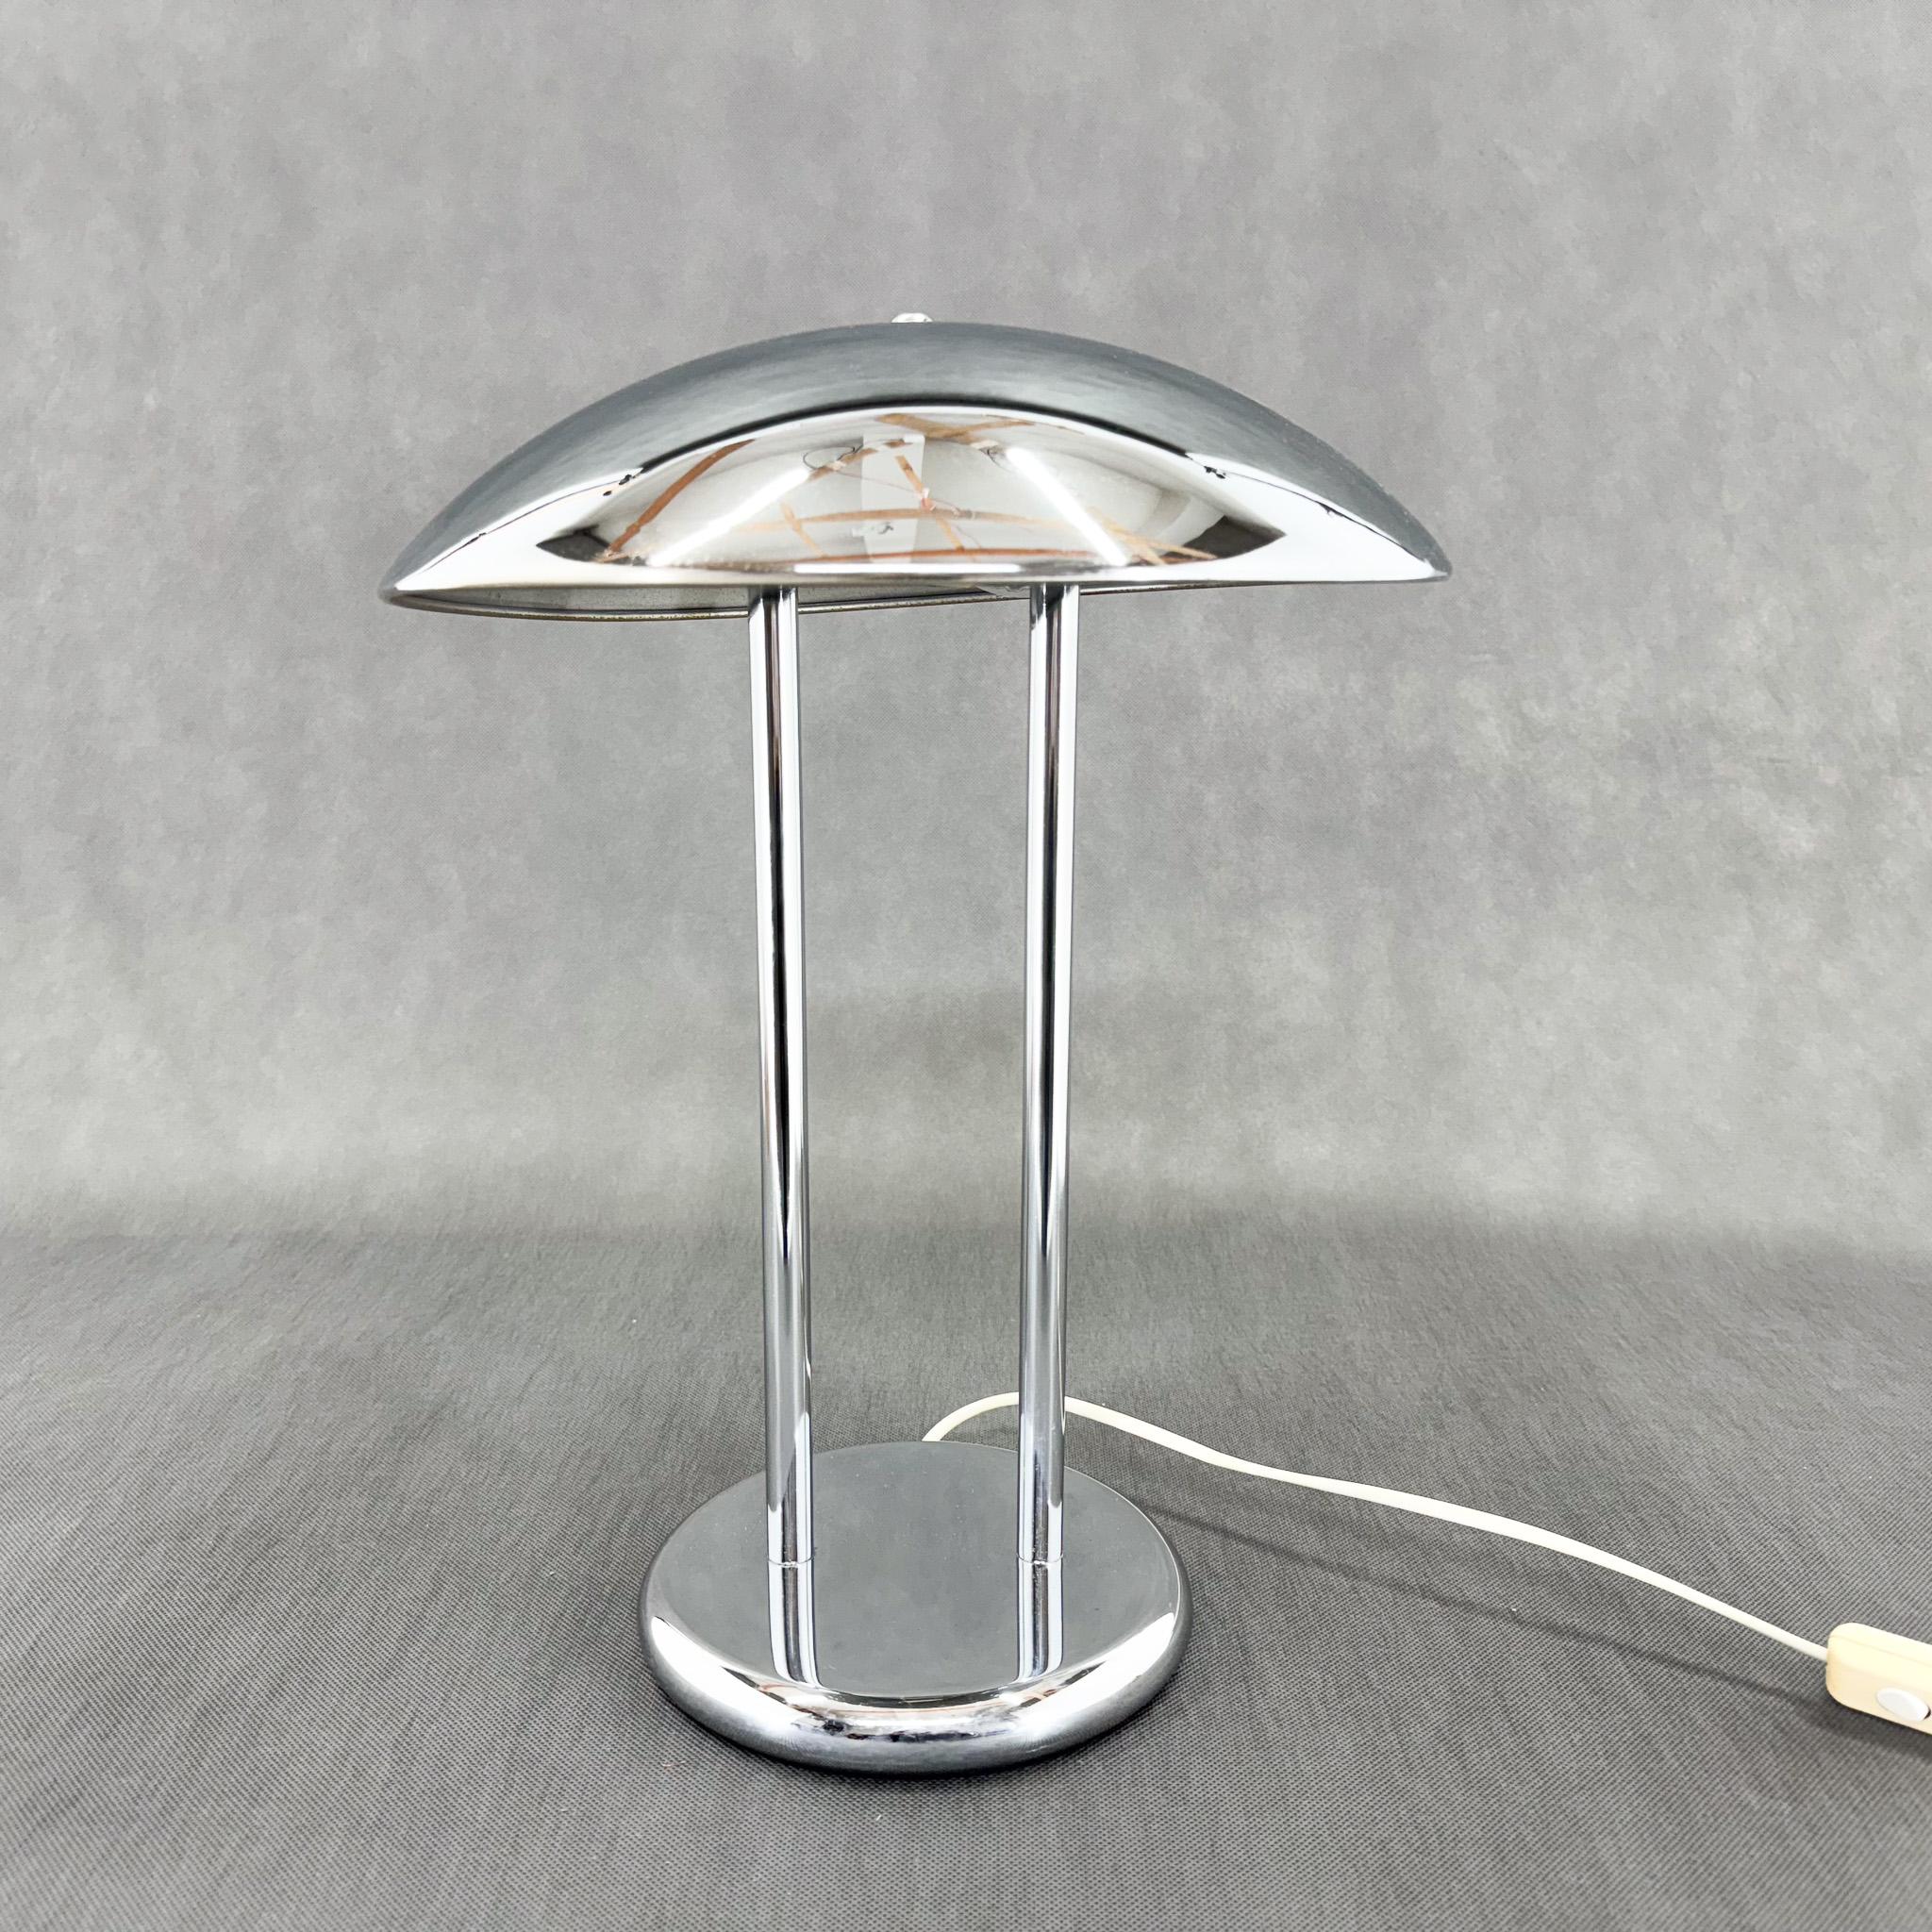 One of Ikea's iconic pieces. A chrome table lamp made in the 1980s. Good vintage condition.